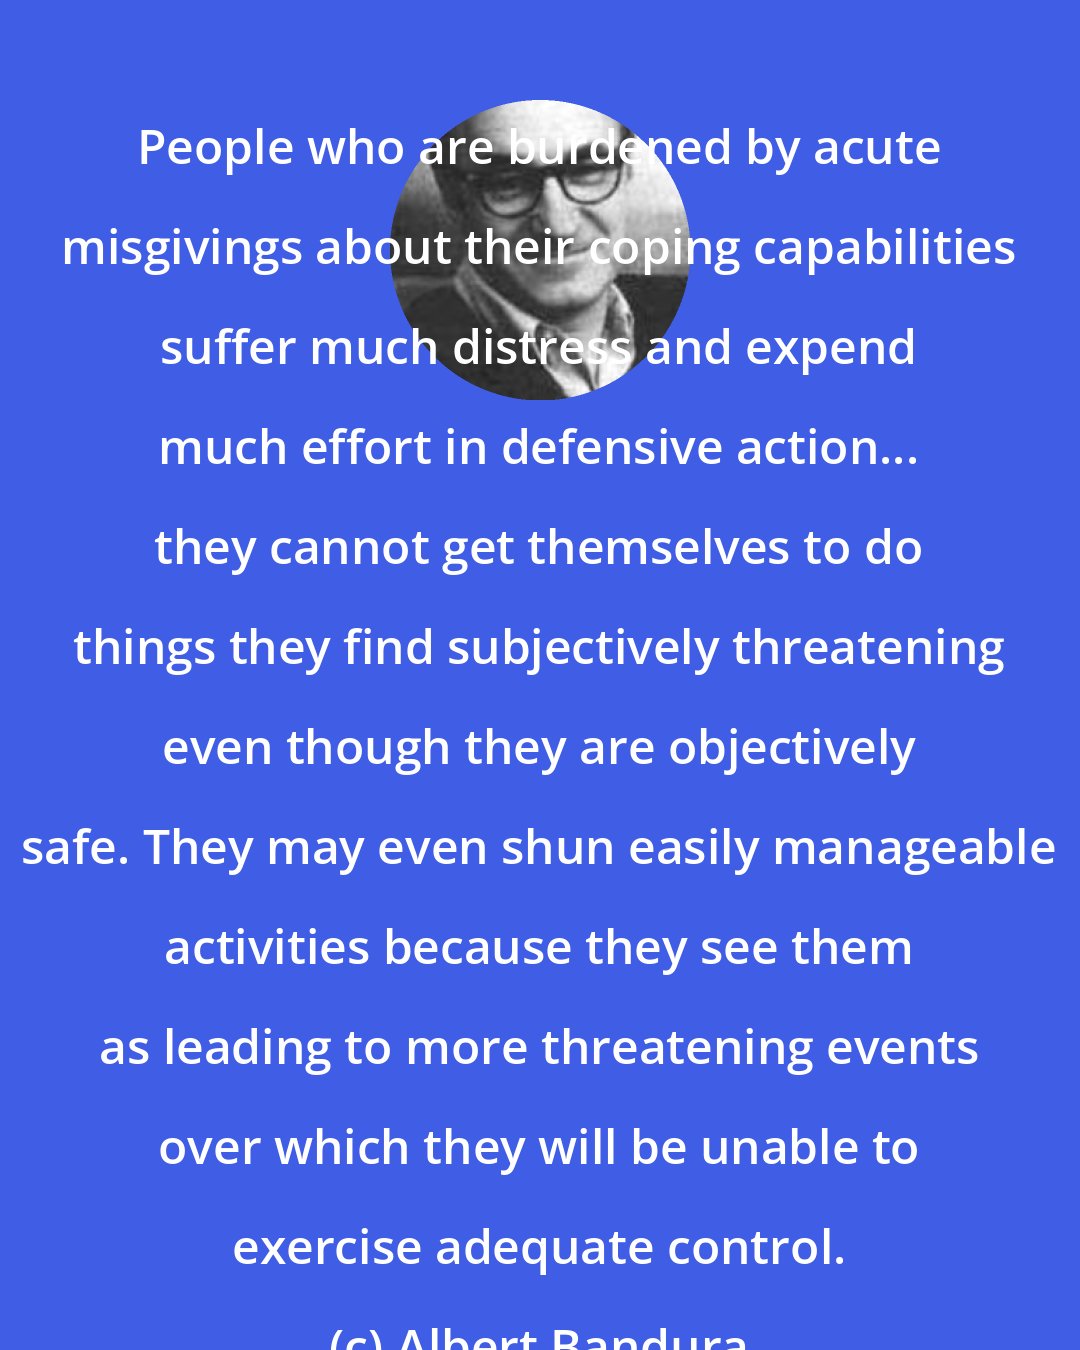 Albert Bandura: People who are burdened by acute misgivings about their coping capabilities suffer much distress and expend much effort in defensive action... they cannot get themselves to do things they find subjectively threatening even though they are objectively safe. They may even shun easily manageable activities because they see them as leading to more threatening events over which they will be unable to exercise adequate control.